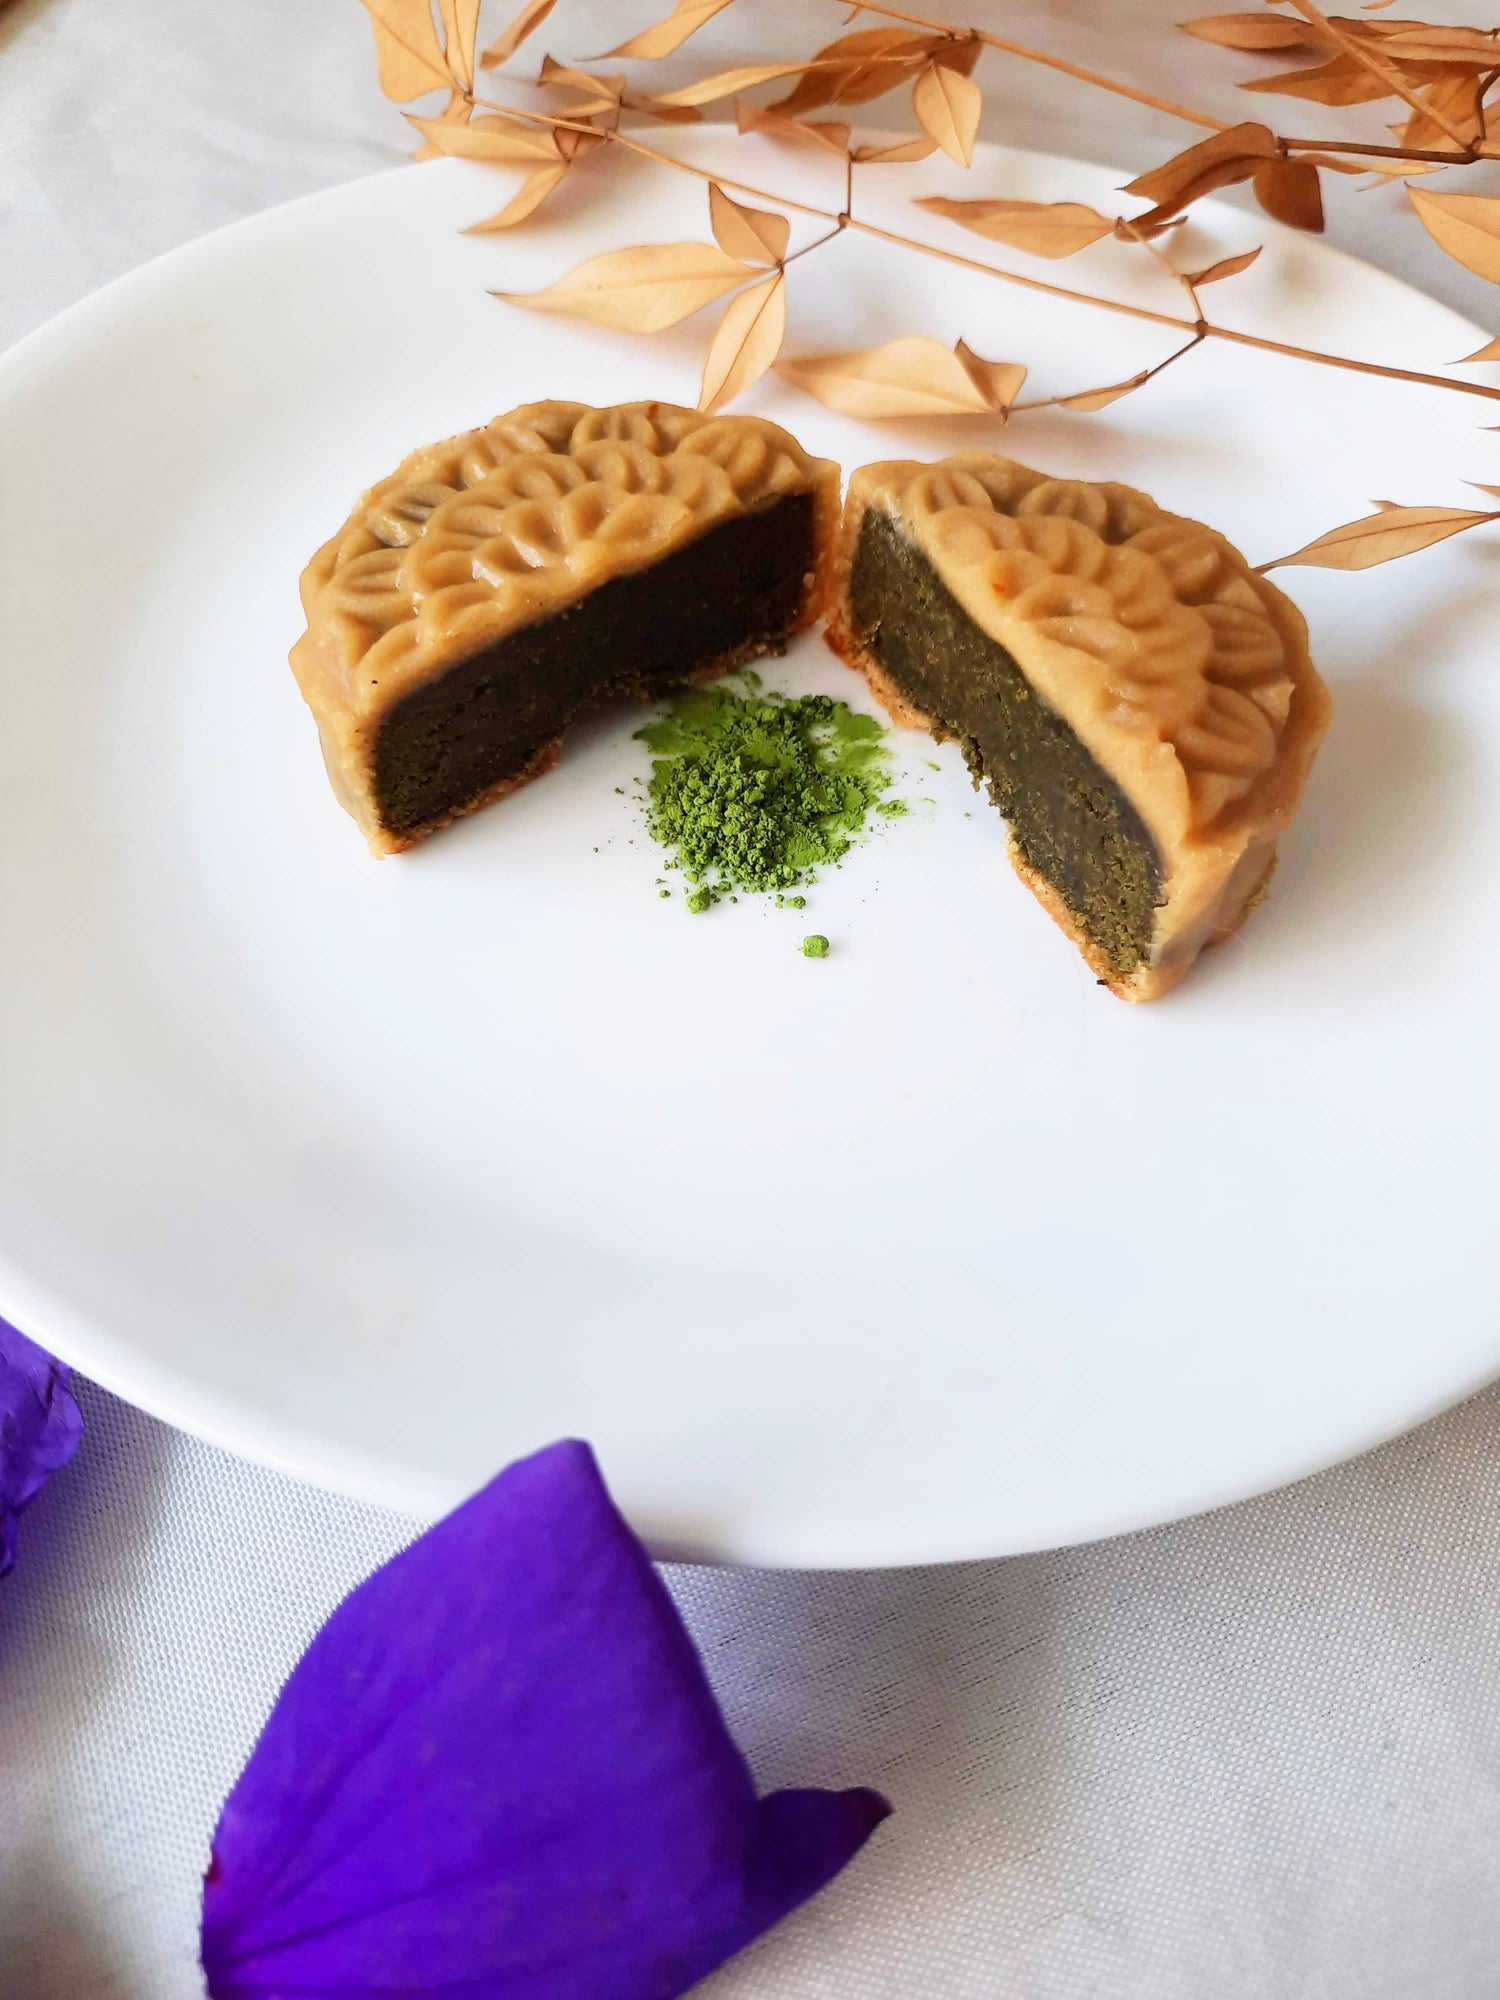 Matcha mooncake cut in half with matcha powder in between the two halves. Matcha filling showing the the camera. Purple petals towards the forefront of the camera with leaves on a thin branch in the back.